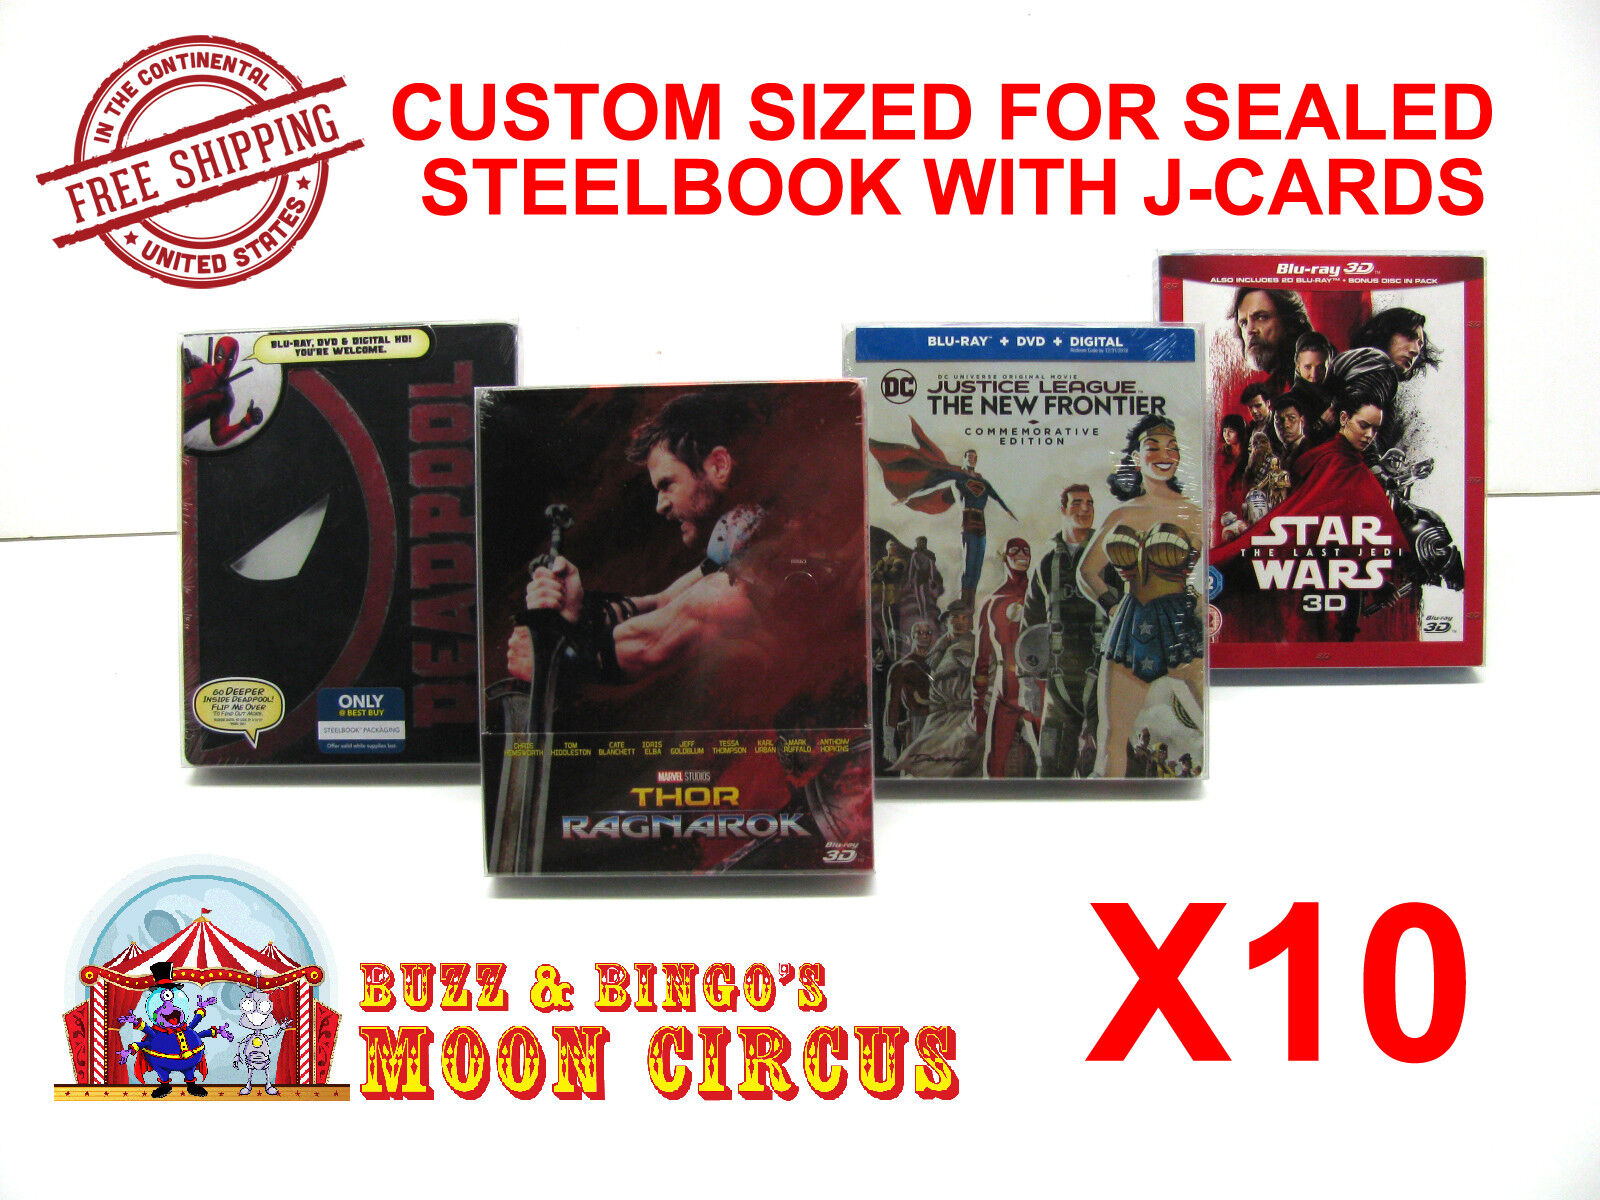 10x BLU-RAY STEELBOOK WITH J-CARDS (SIZE BR5) - CLEAR PLASTIC BOX PROTECTORS Dr. Retro Does Not Apply